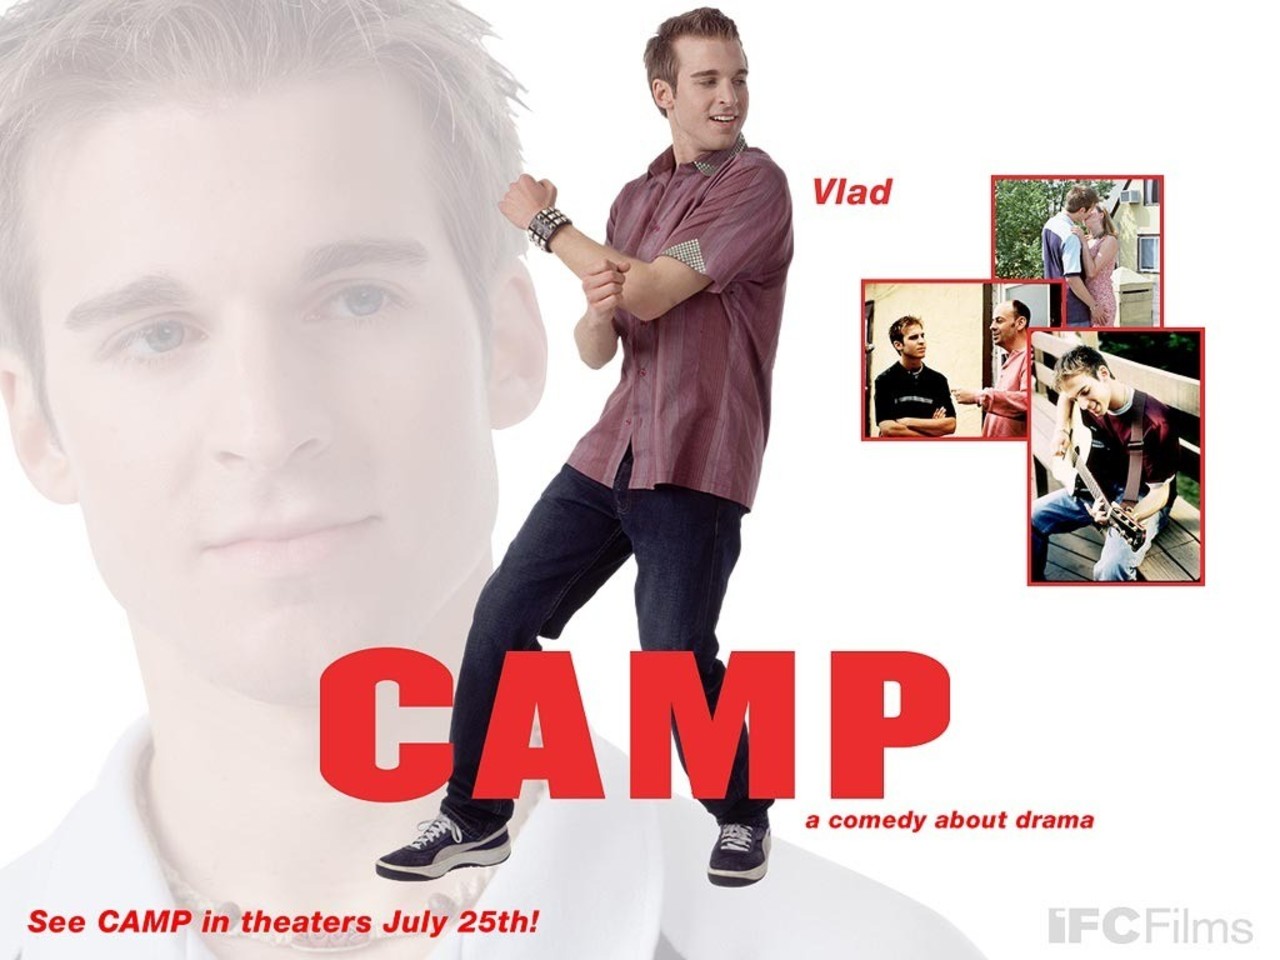 Daniel Letterle "Camp - a comedy about drama" movie poster